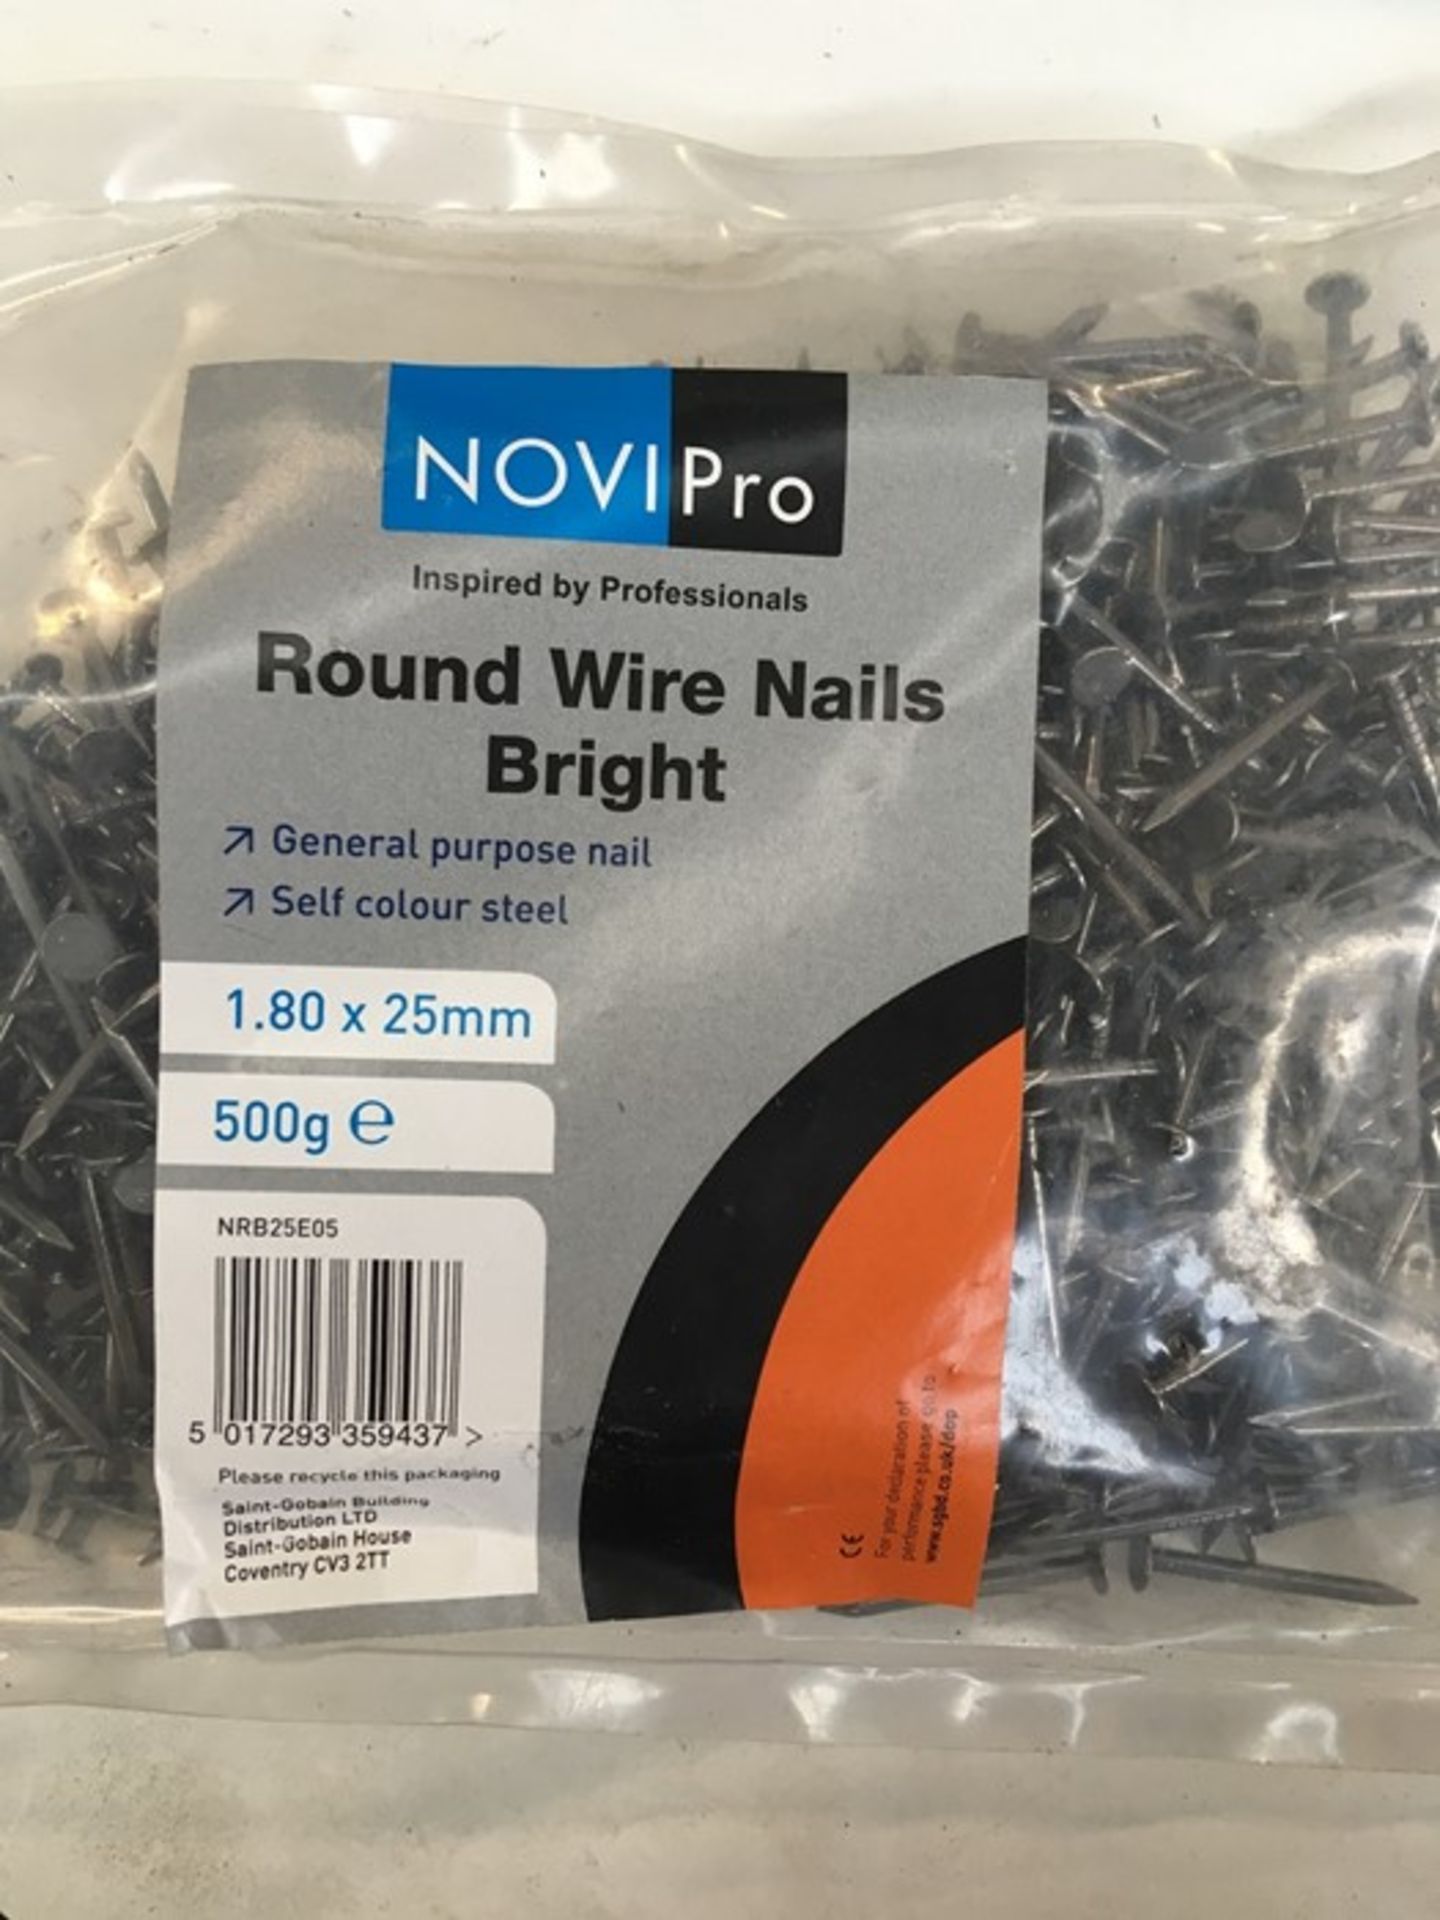 1 BAGGED SET OF NOVIPRO ROUND WIRE NAILS BRIGHT / WEIGHT 500G / SIZE 1.80 X 25MM / PN - 624 (